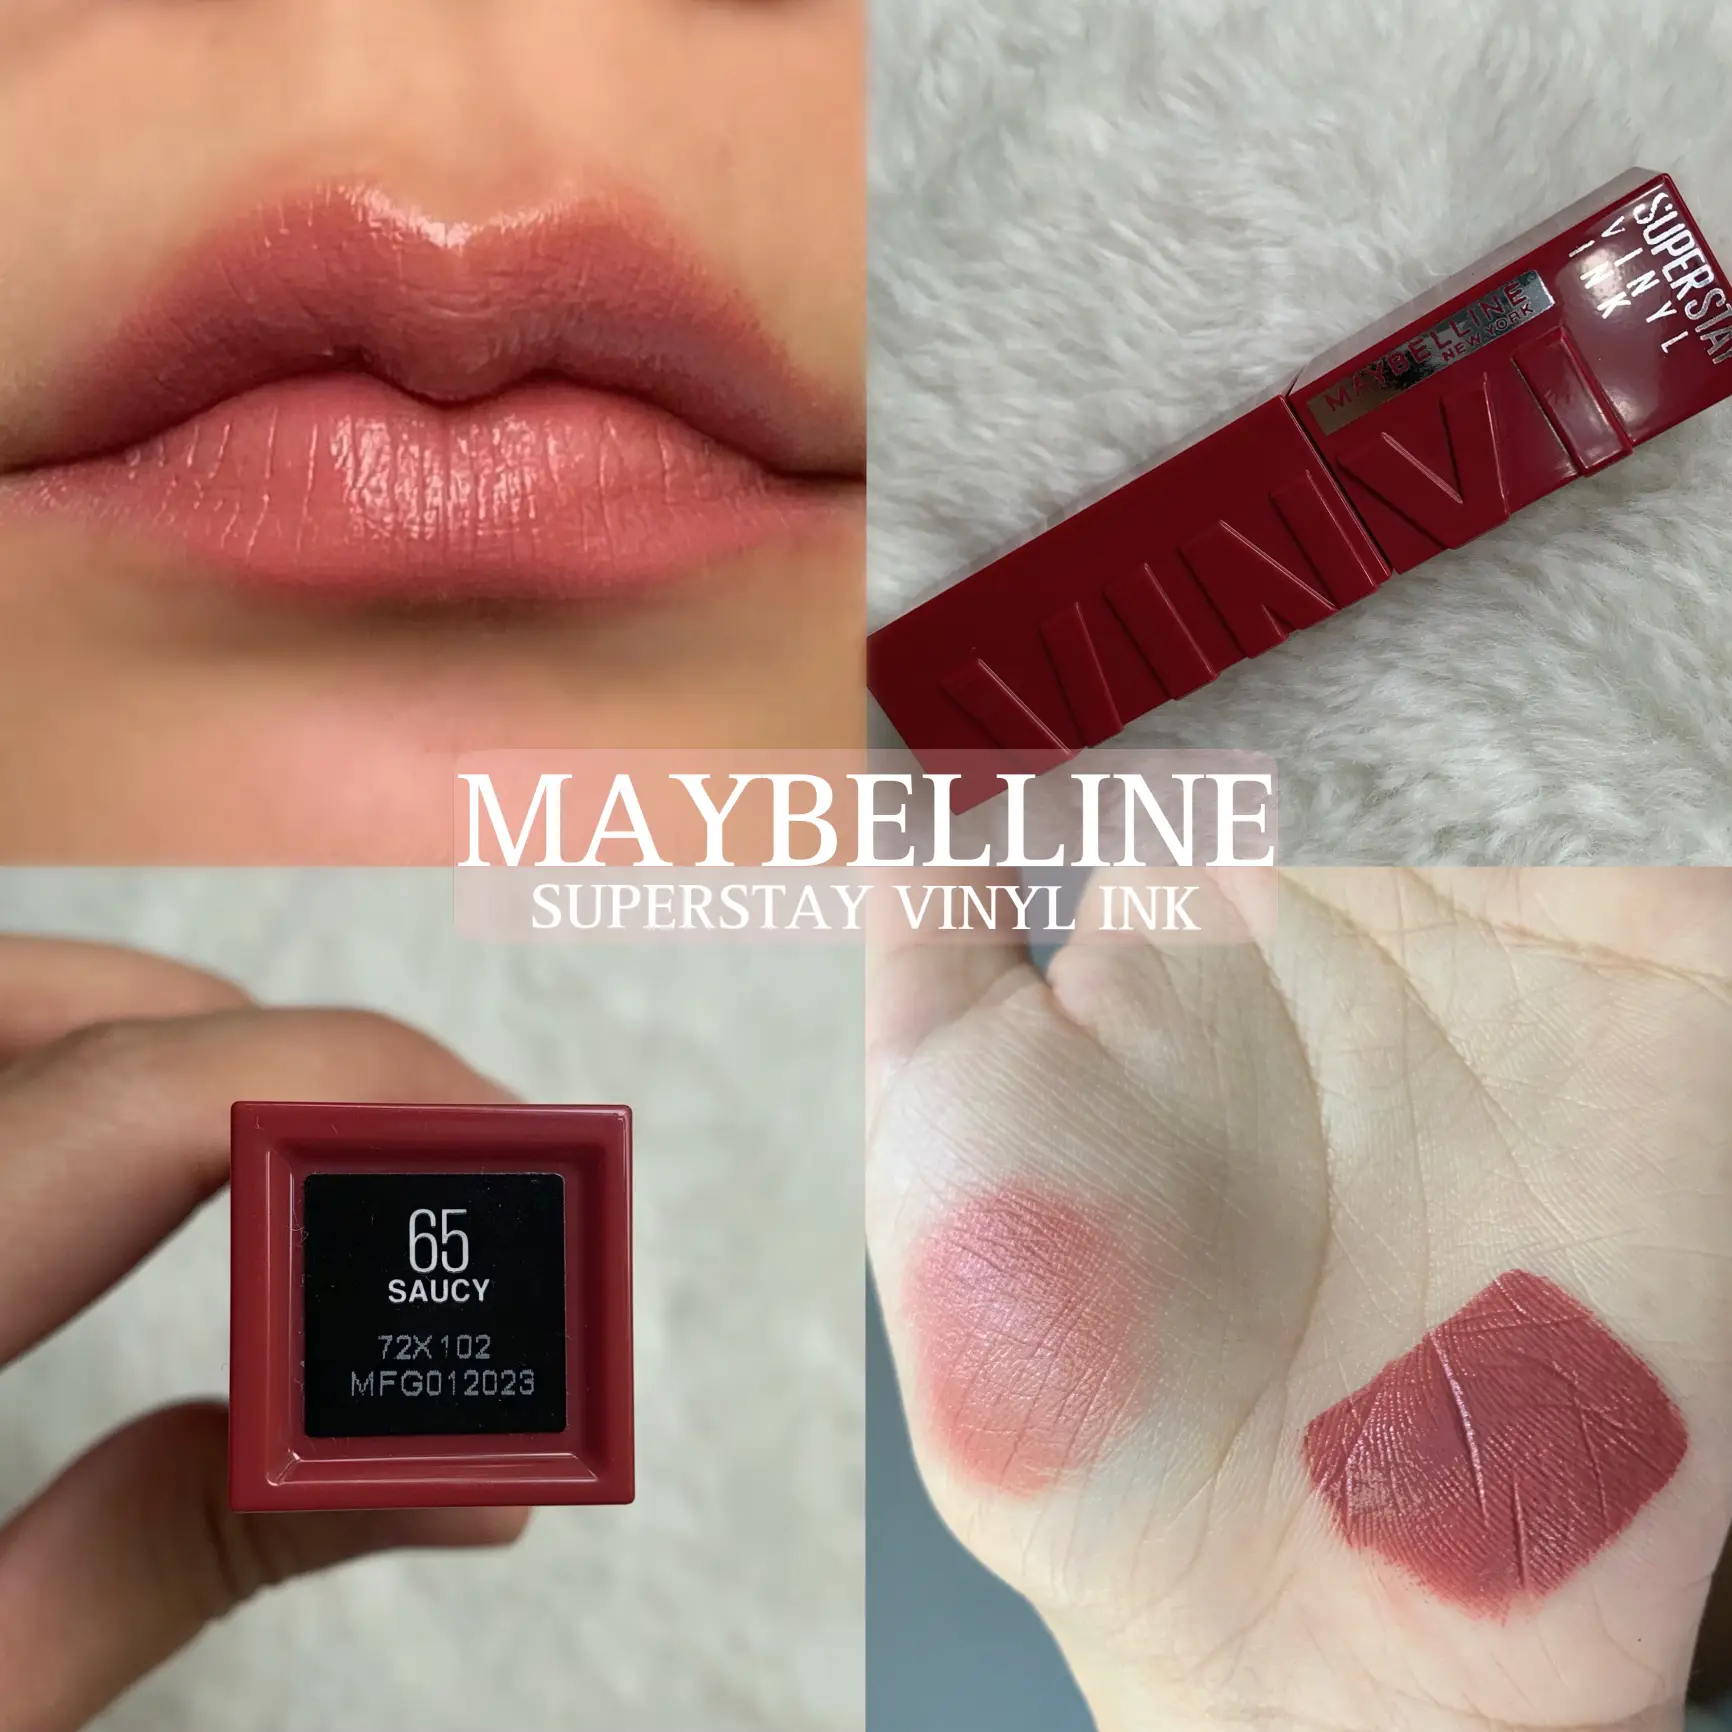 MAYBELLINE SUPER STAY VINYL INK SWATCHES 🔥 🔥 🔥 & REVIEW